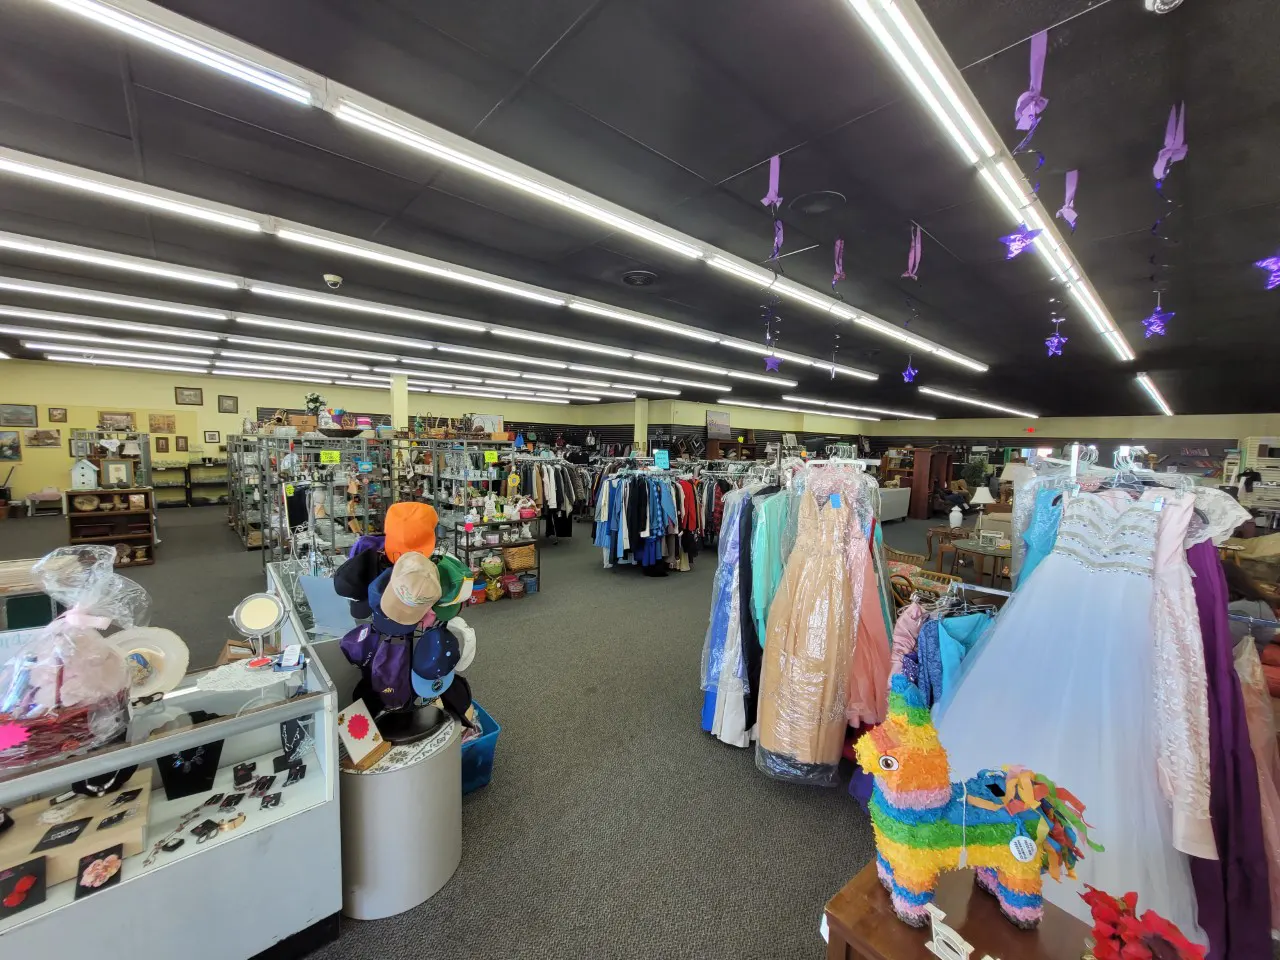 View of entire thrift store, clothing